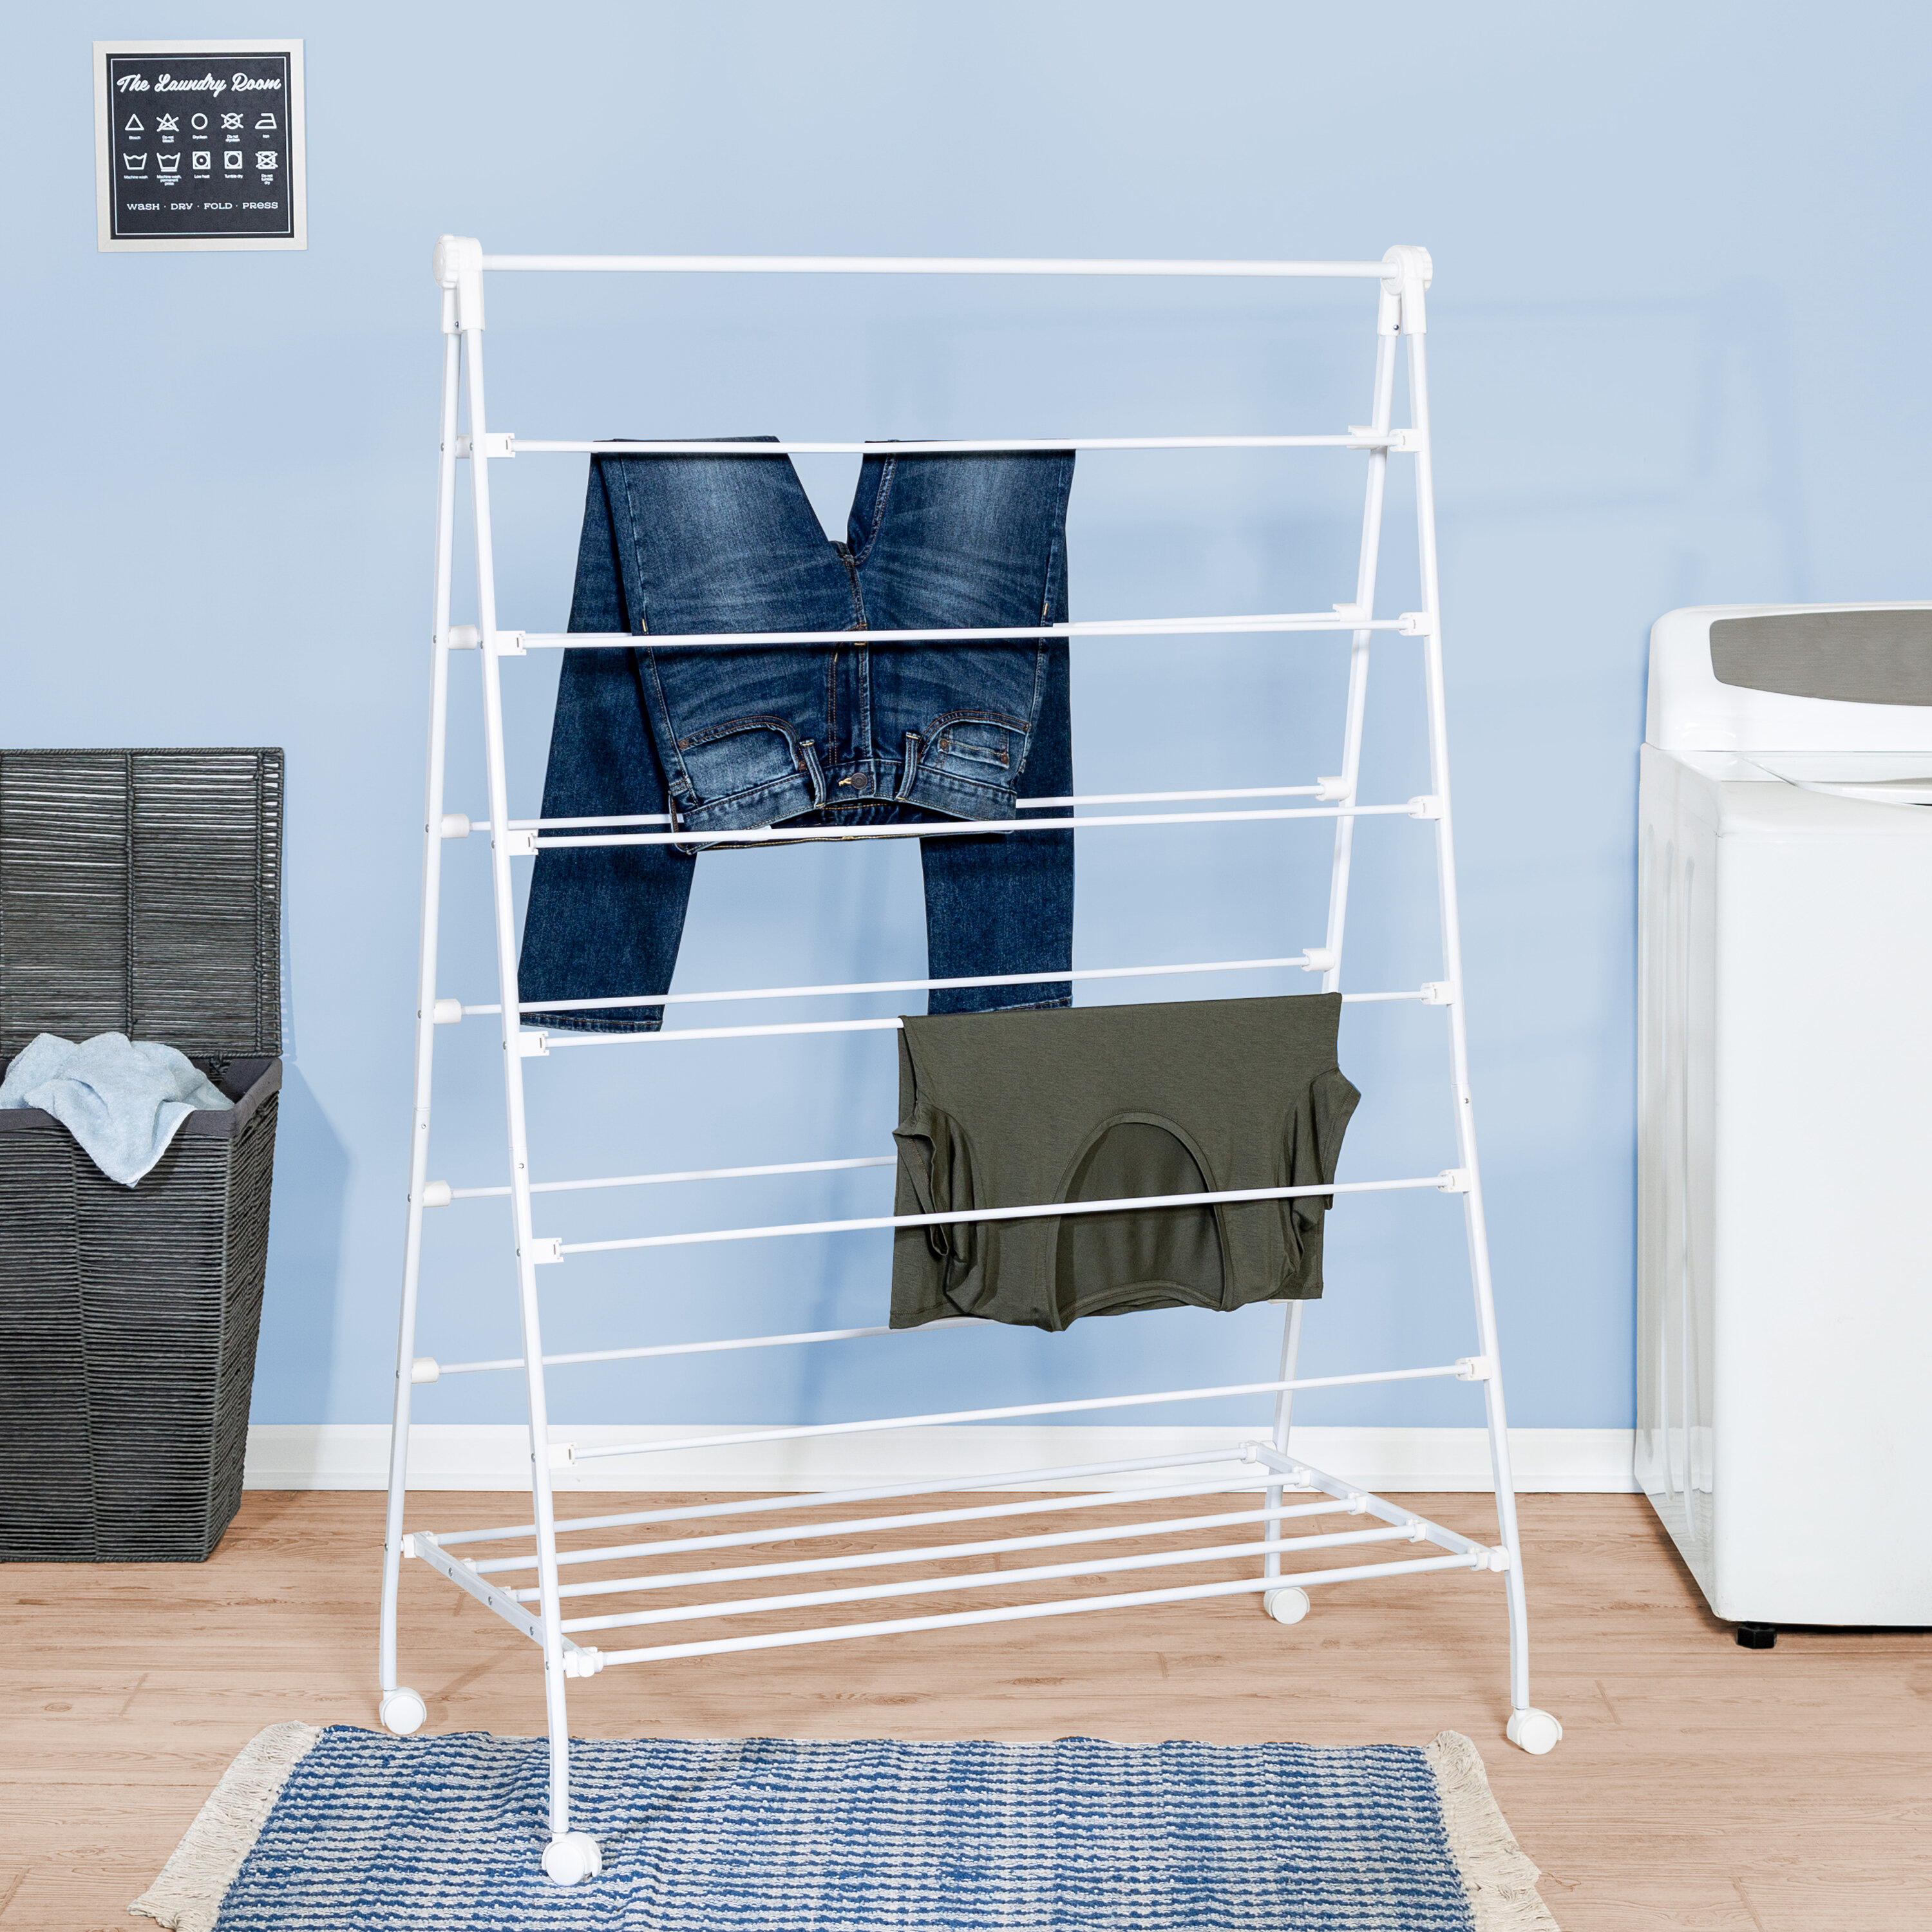 Laundry Drying Rack Hanger Clothes Dryer Folding Storage Heavy Duty X Frame NEW 